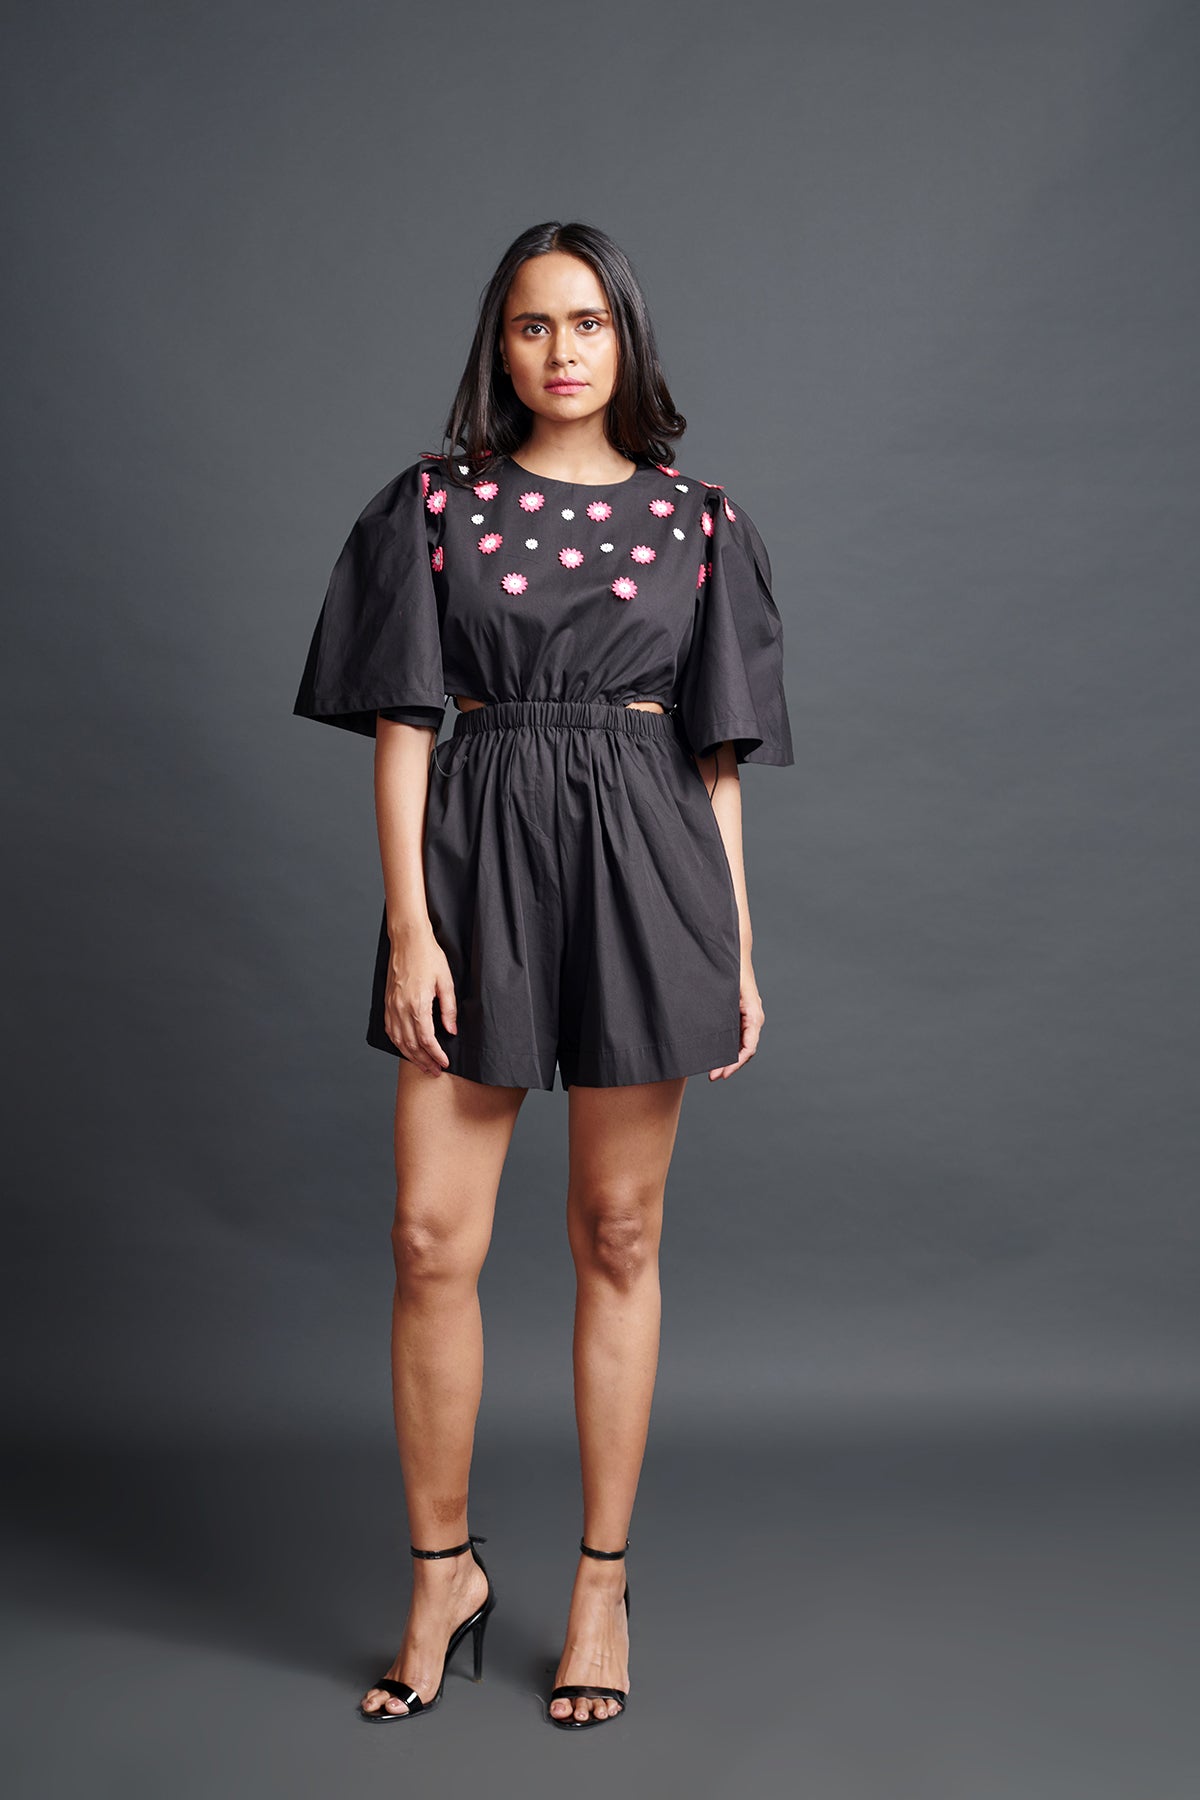 Image of BLACK PLAYSUIT IN COTTON BASE WITH CUTWORK EMBROIDERY AND BACKLESS SIDE CUT-OUT DETAIL. From savoirfashions.com